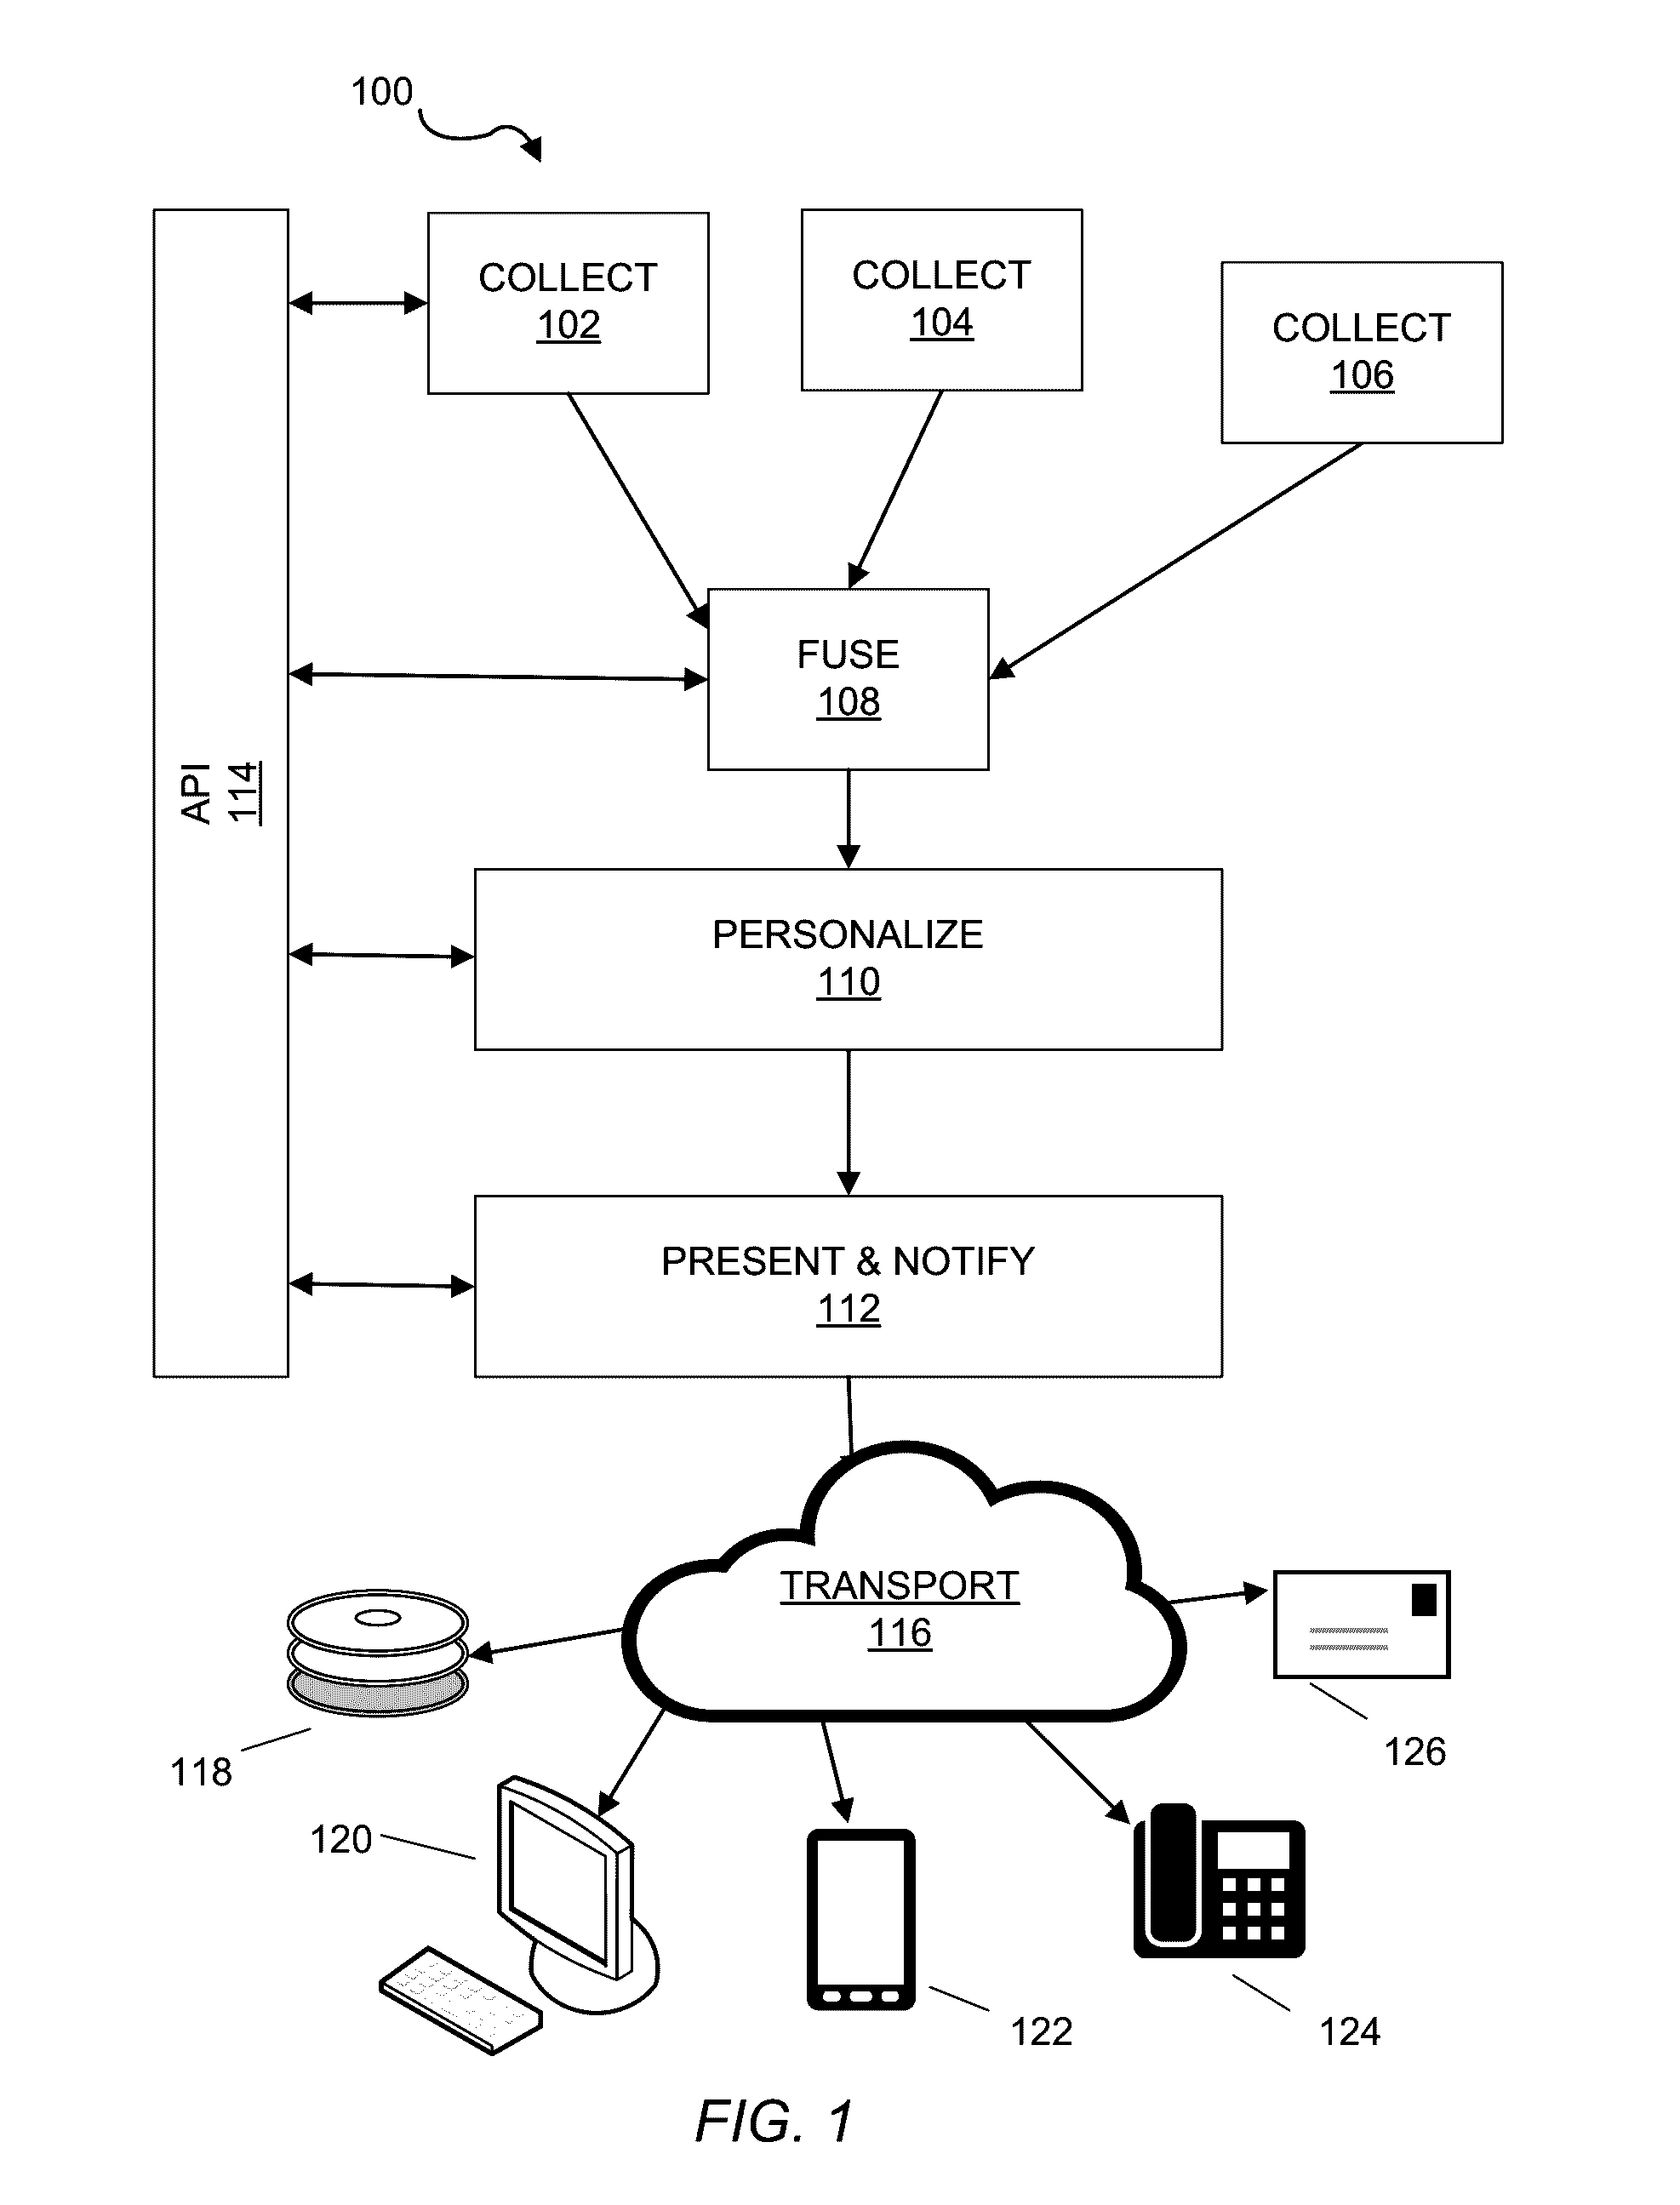 Systems and methods for creation, delivery and tracking of electronic messages